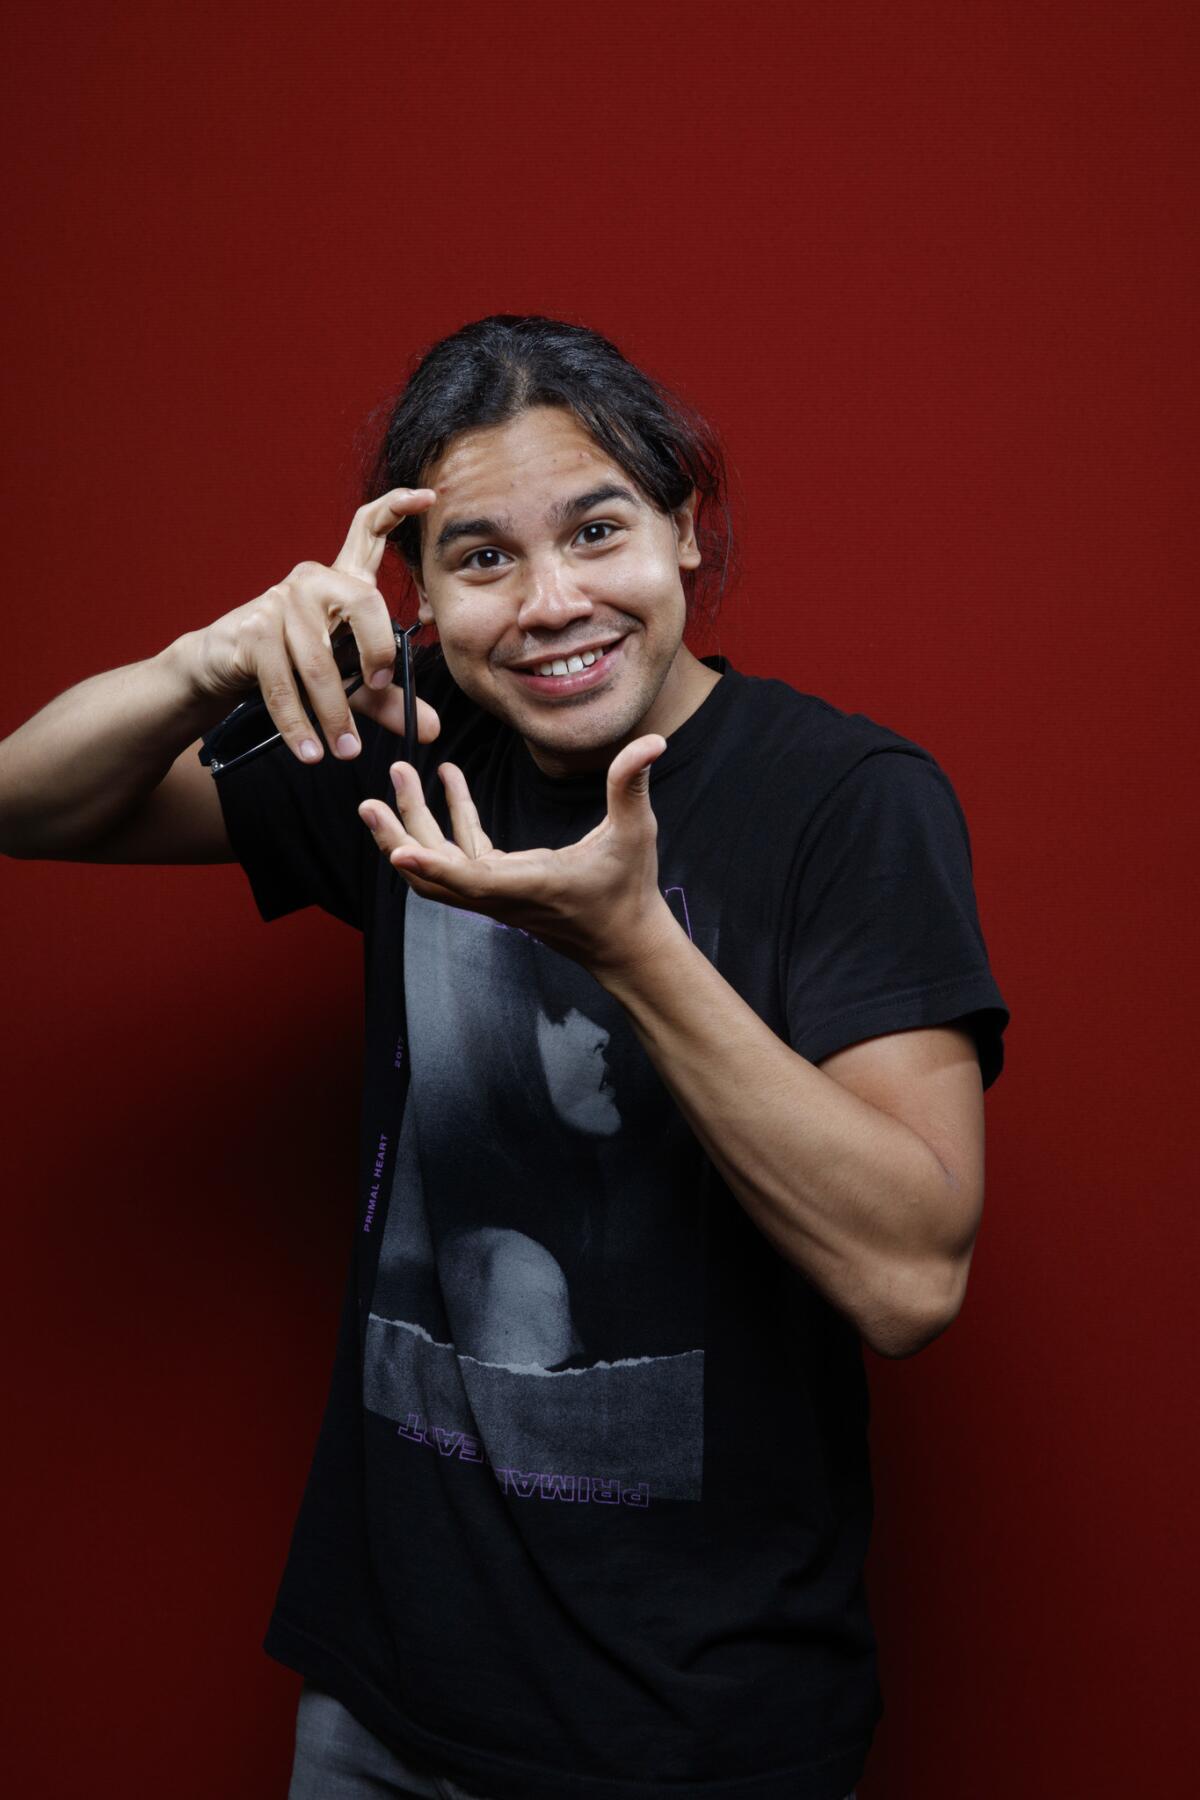 Carlos Valdes from the television series "The Flash."